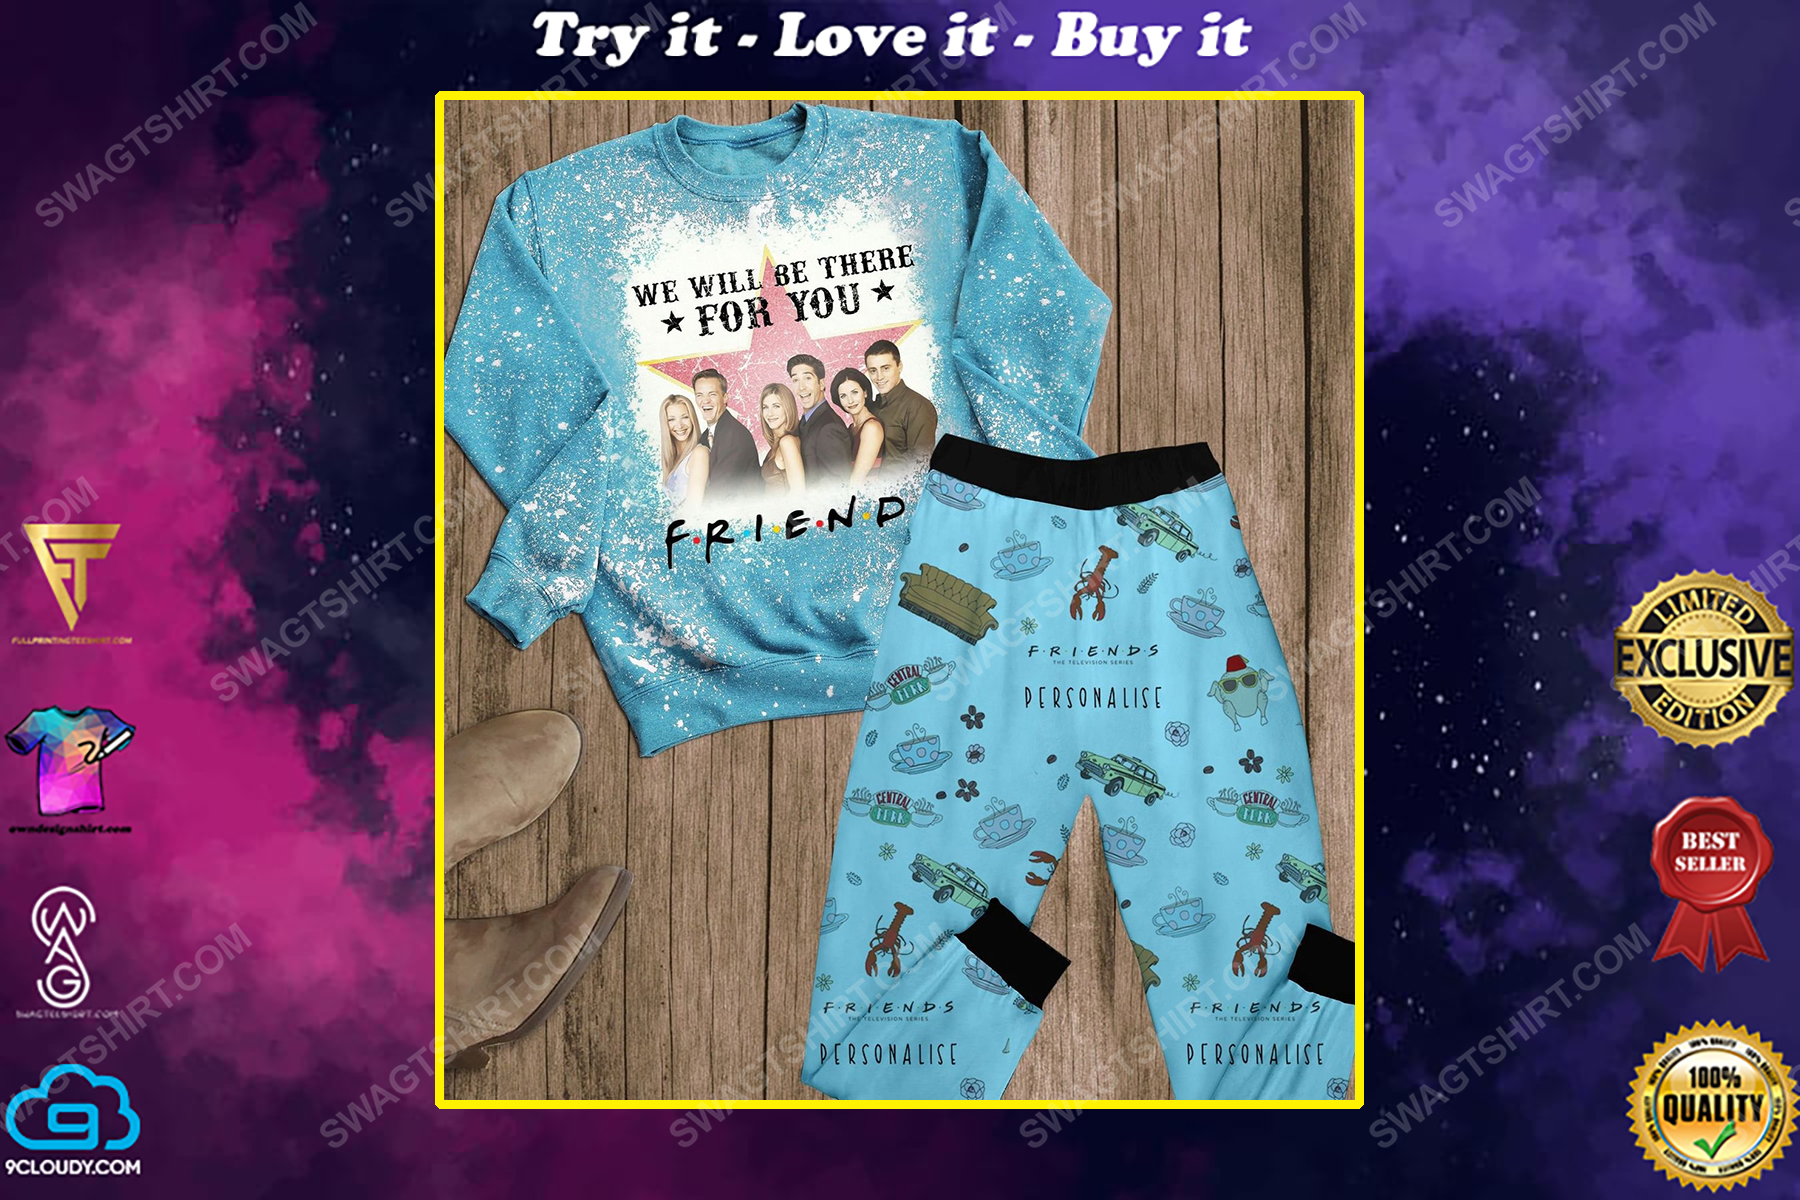 Friends we will be there for you full print pajamas set